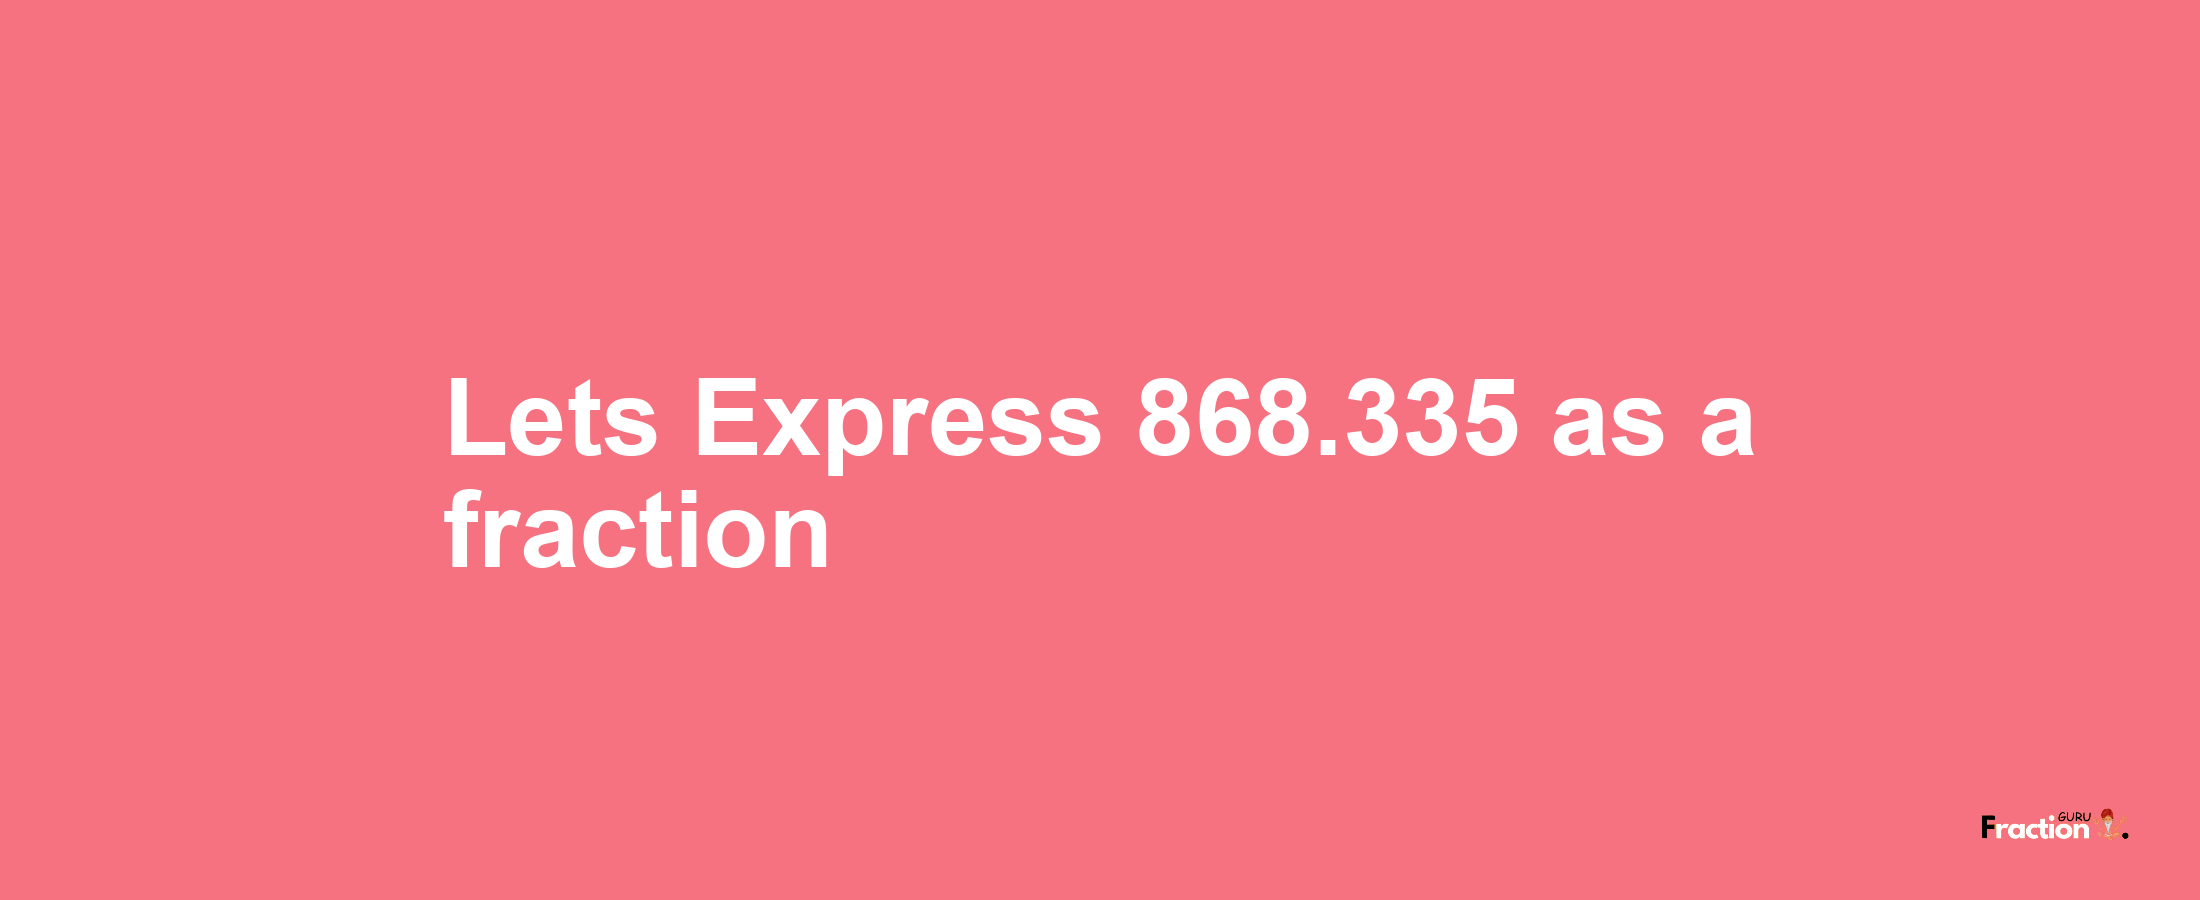 Lets Express 868.335 as afraction